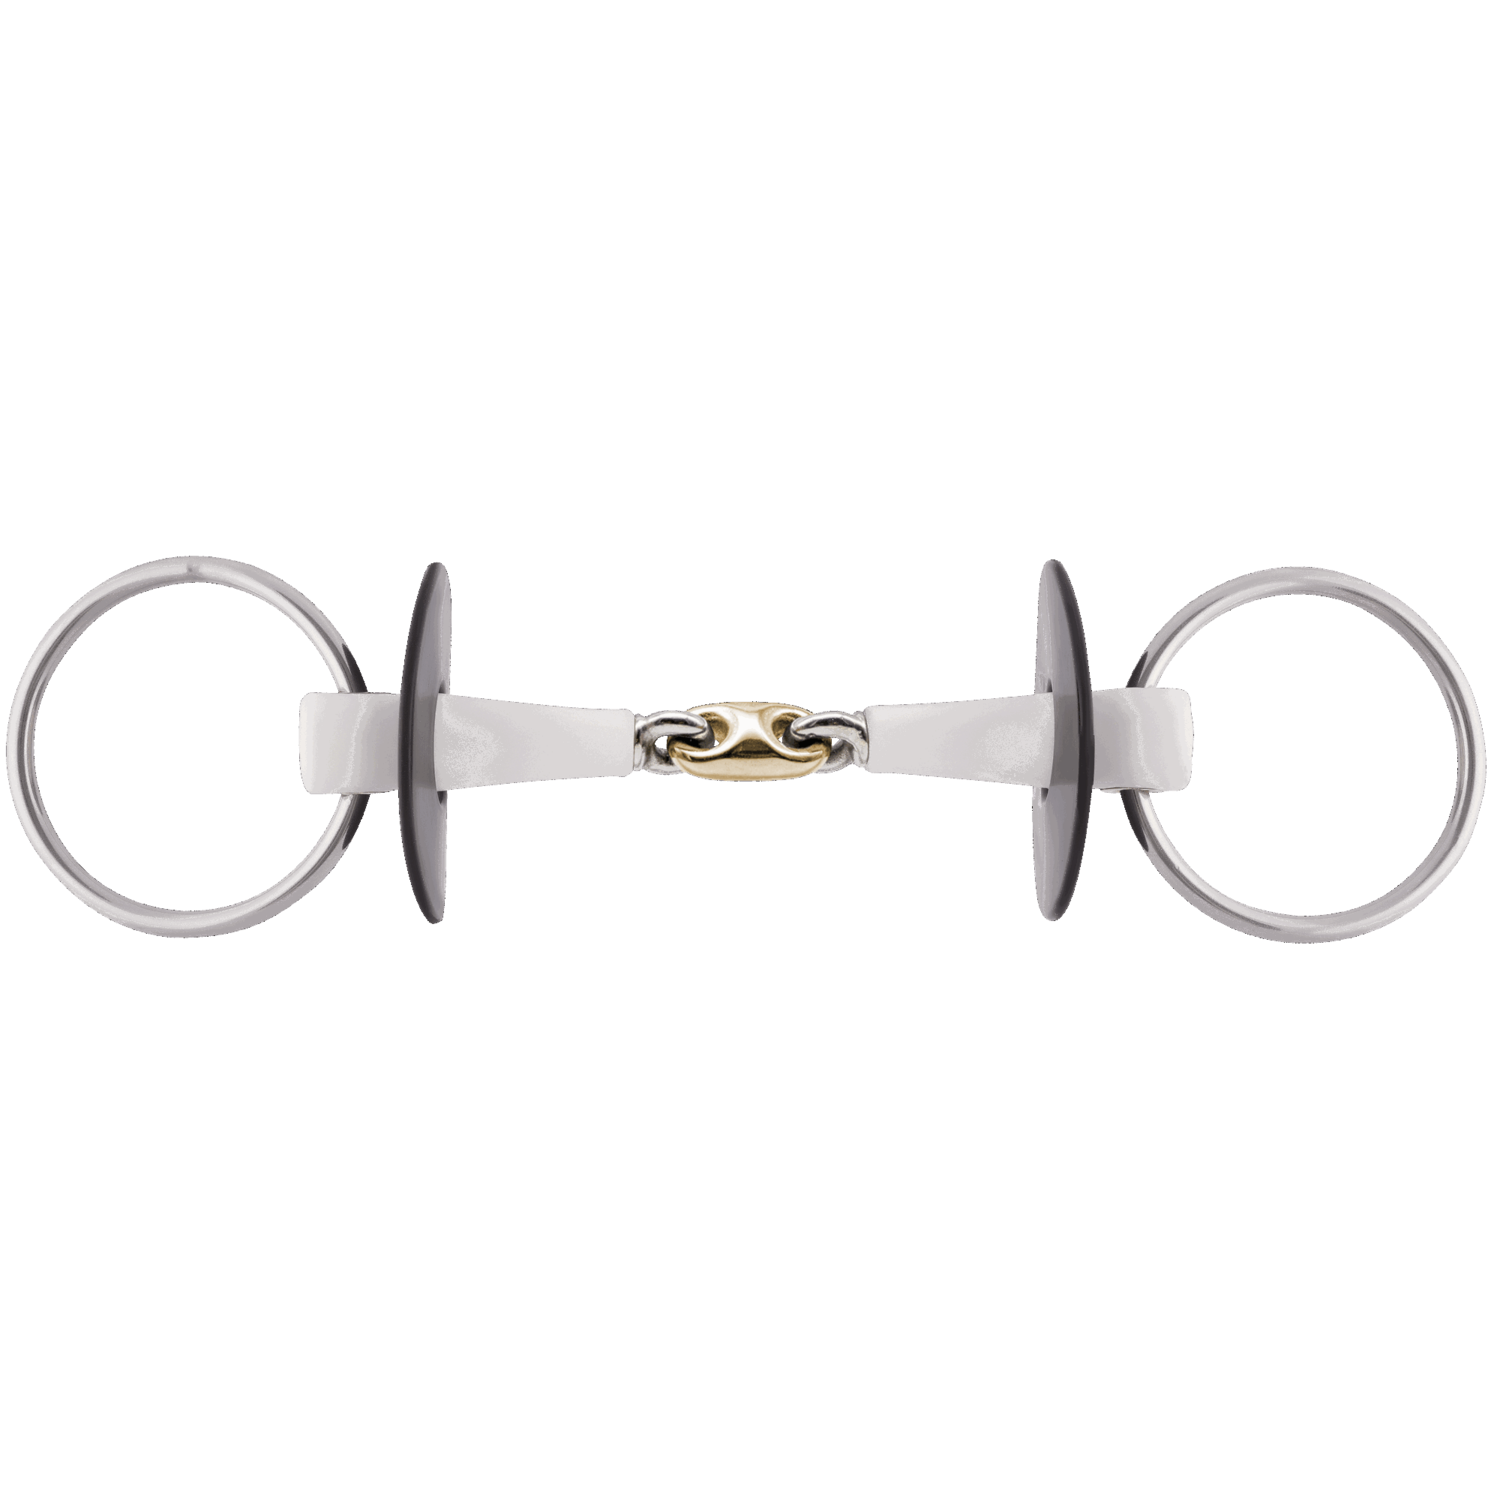 Nathe Loose ring Double Jointed Snaffle with Sensogan middle link- 70mm ring